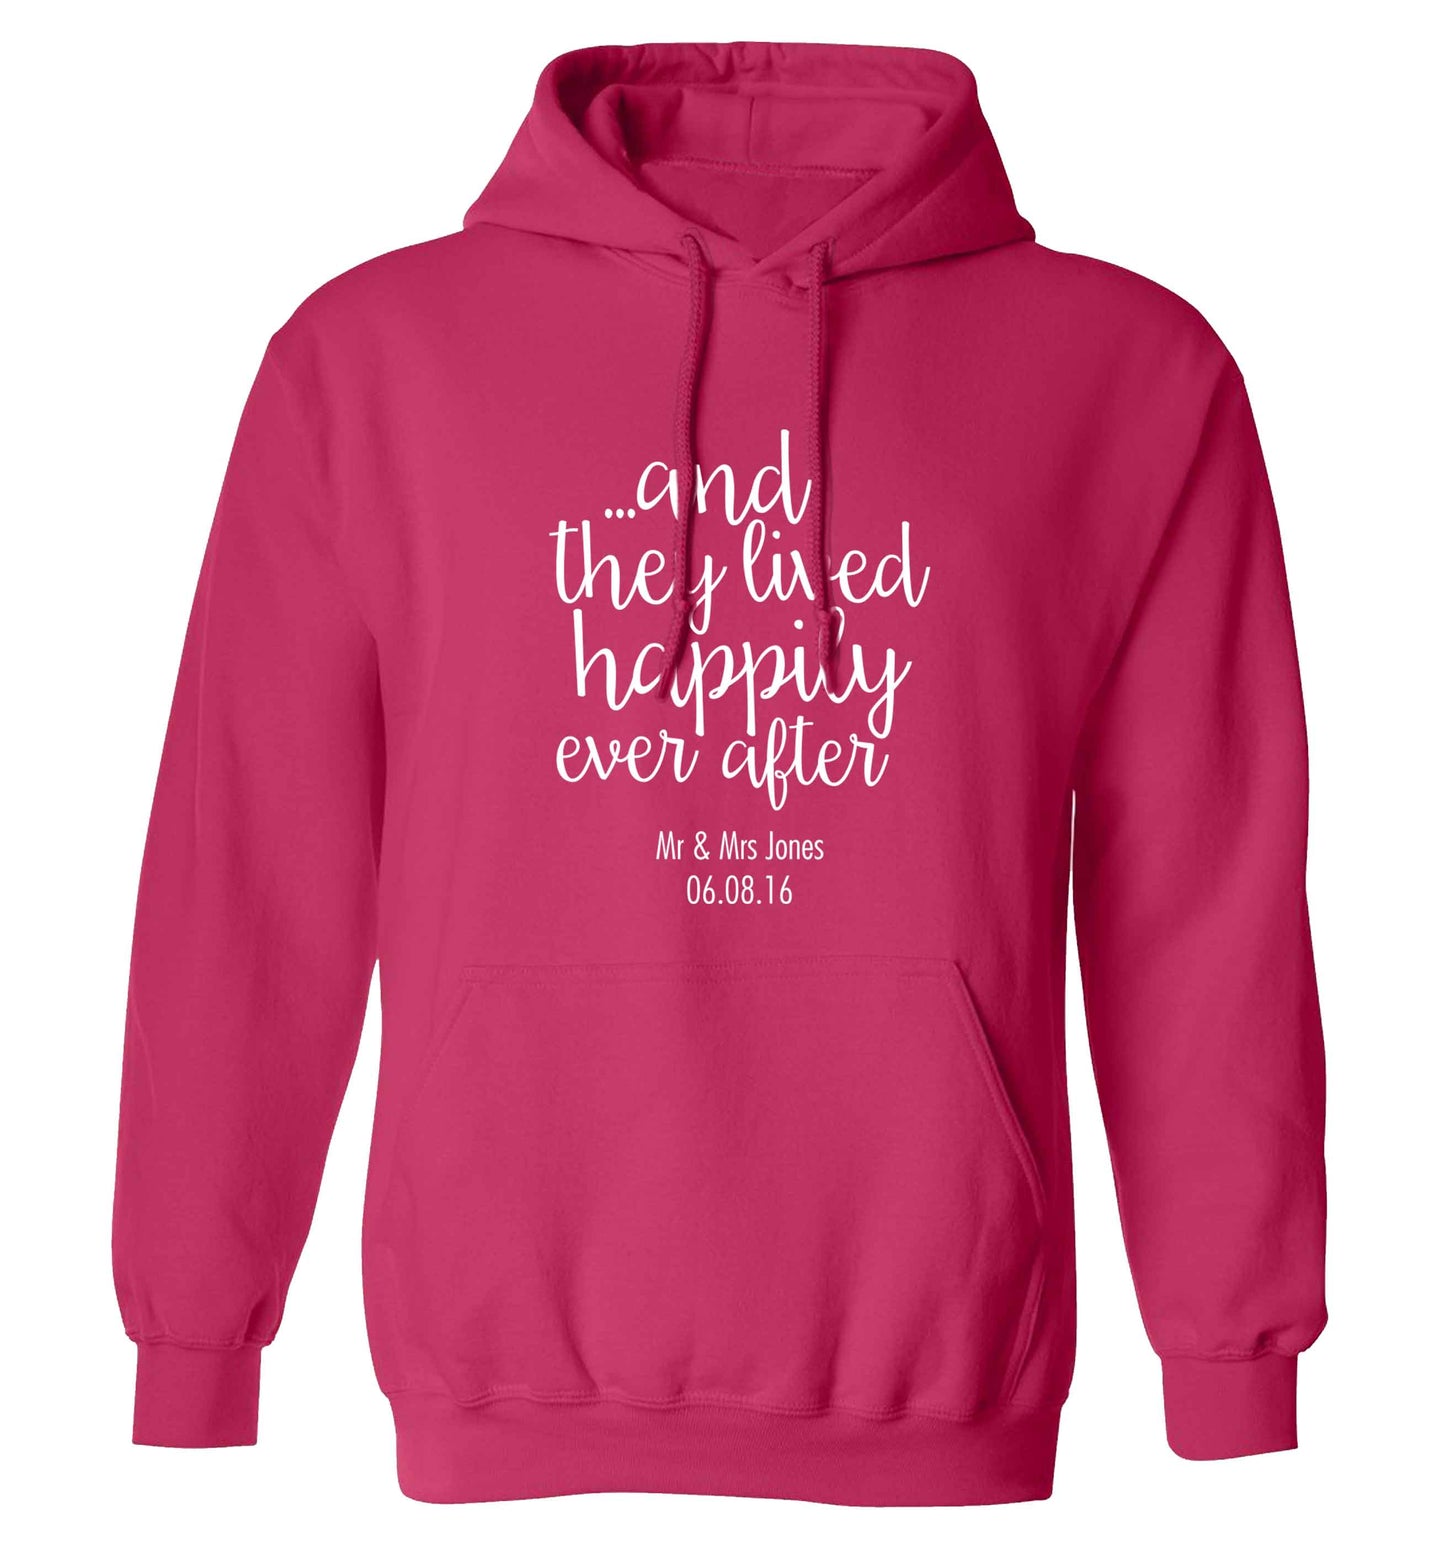 ...and they lived happily ever after - personalised date and names adults unisex pink hoodie 2XL